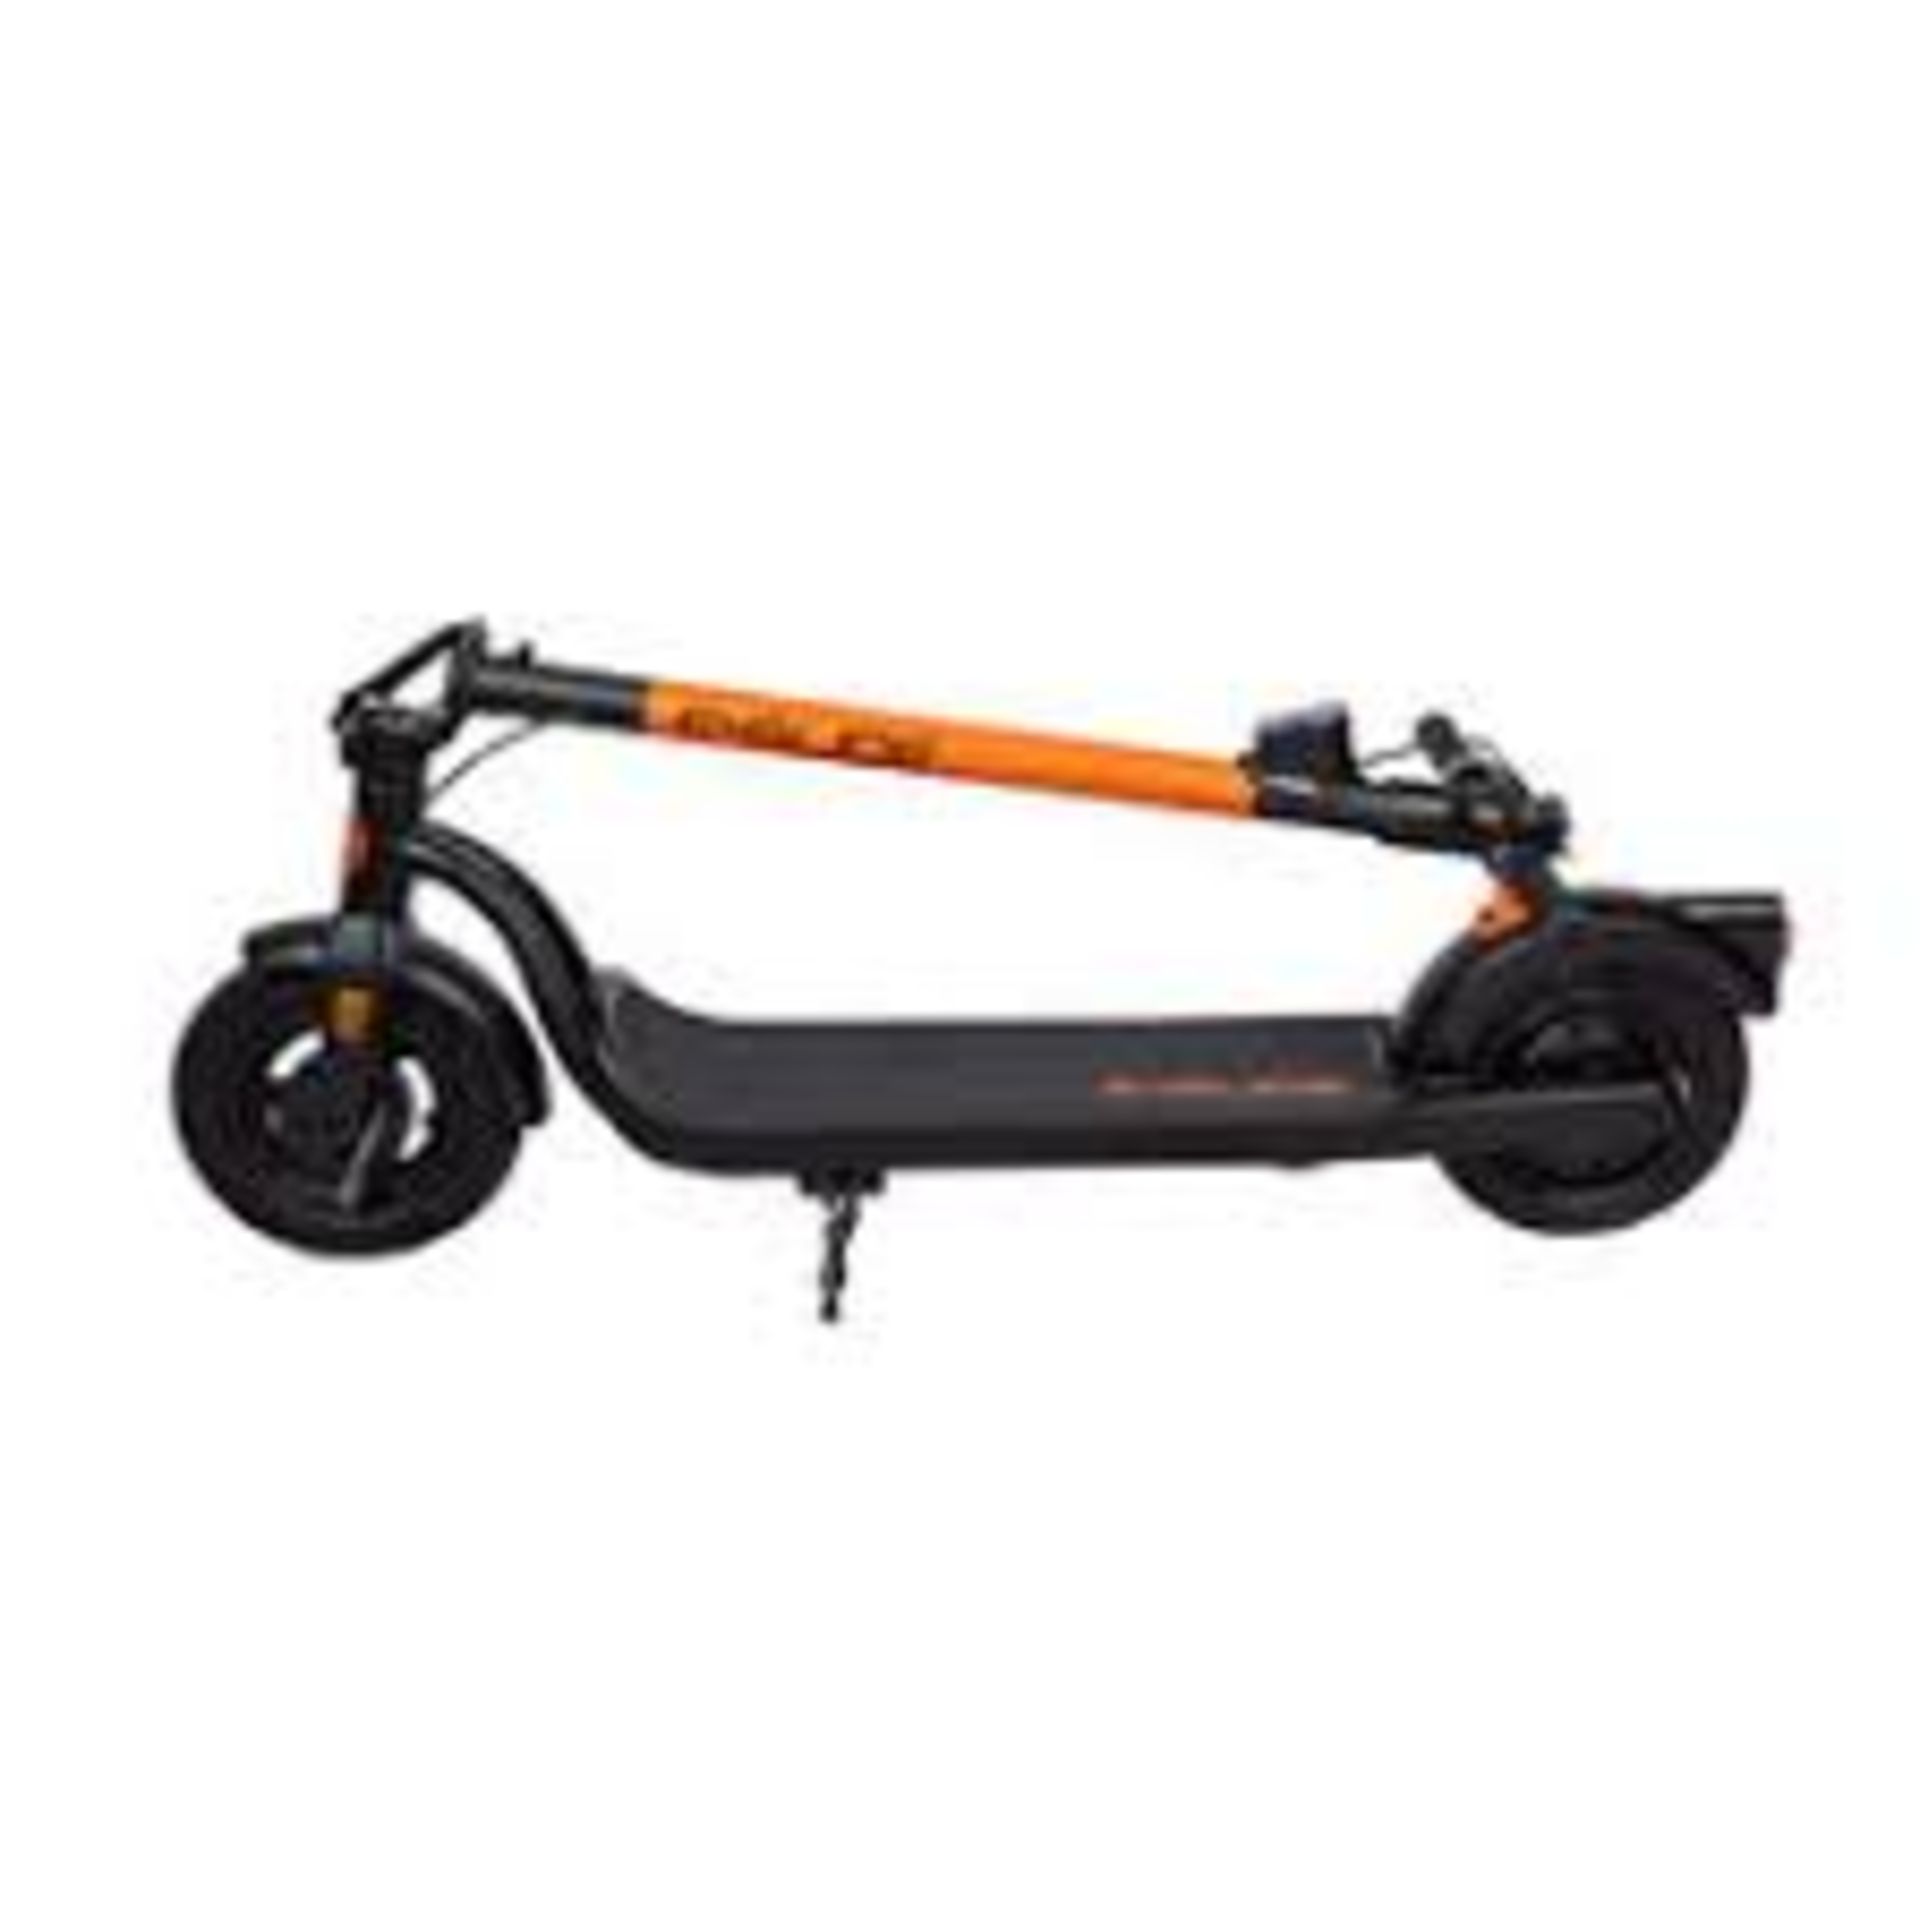 Trade Lot 4 x Brand New E-Glide V2 Electric Scooter Orange and Black RRP £599, Introducing a sleek - Bild 2 aus 3